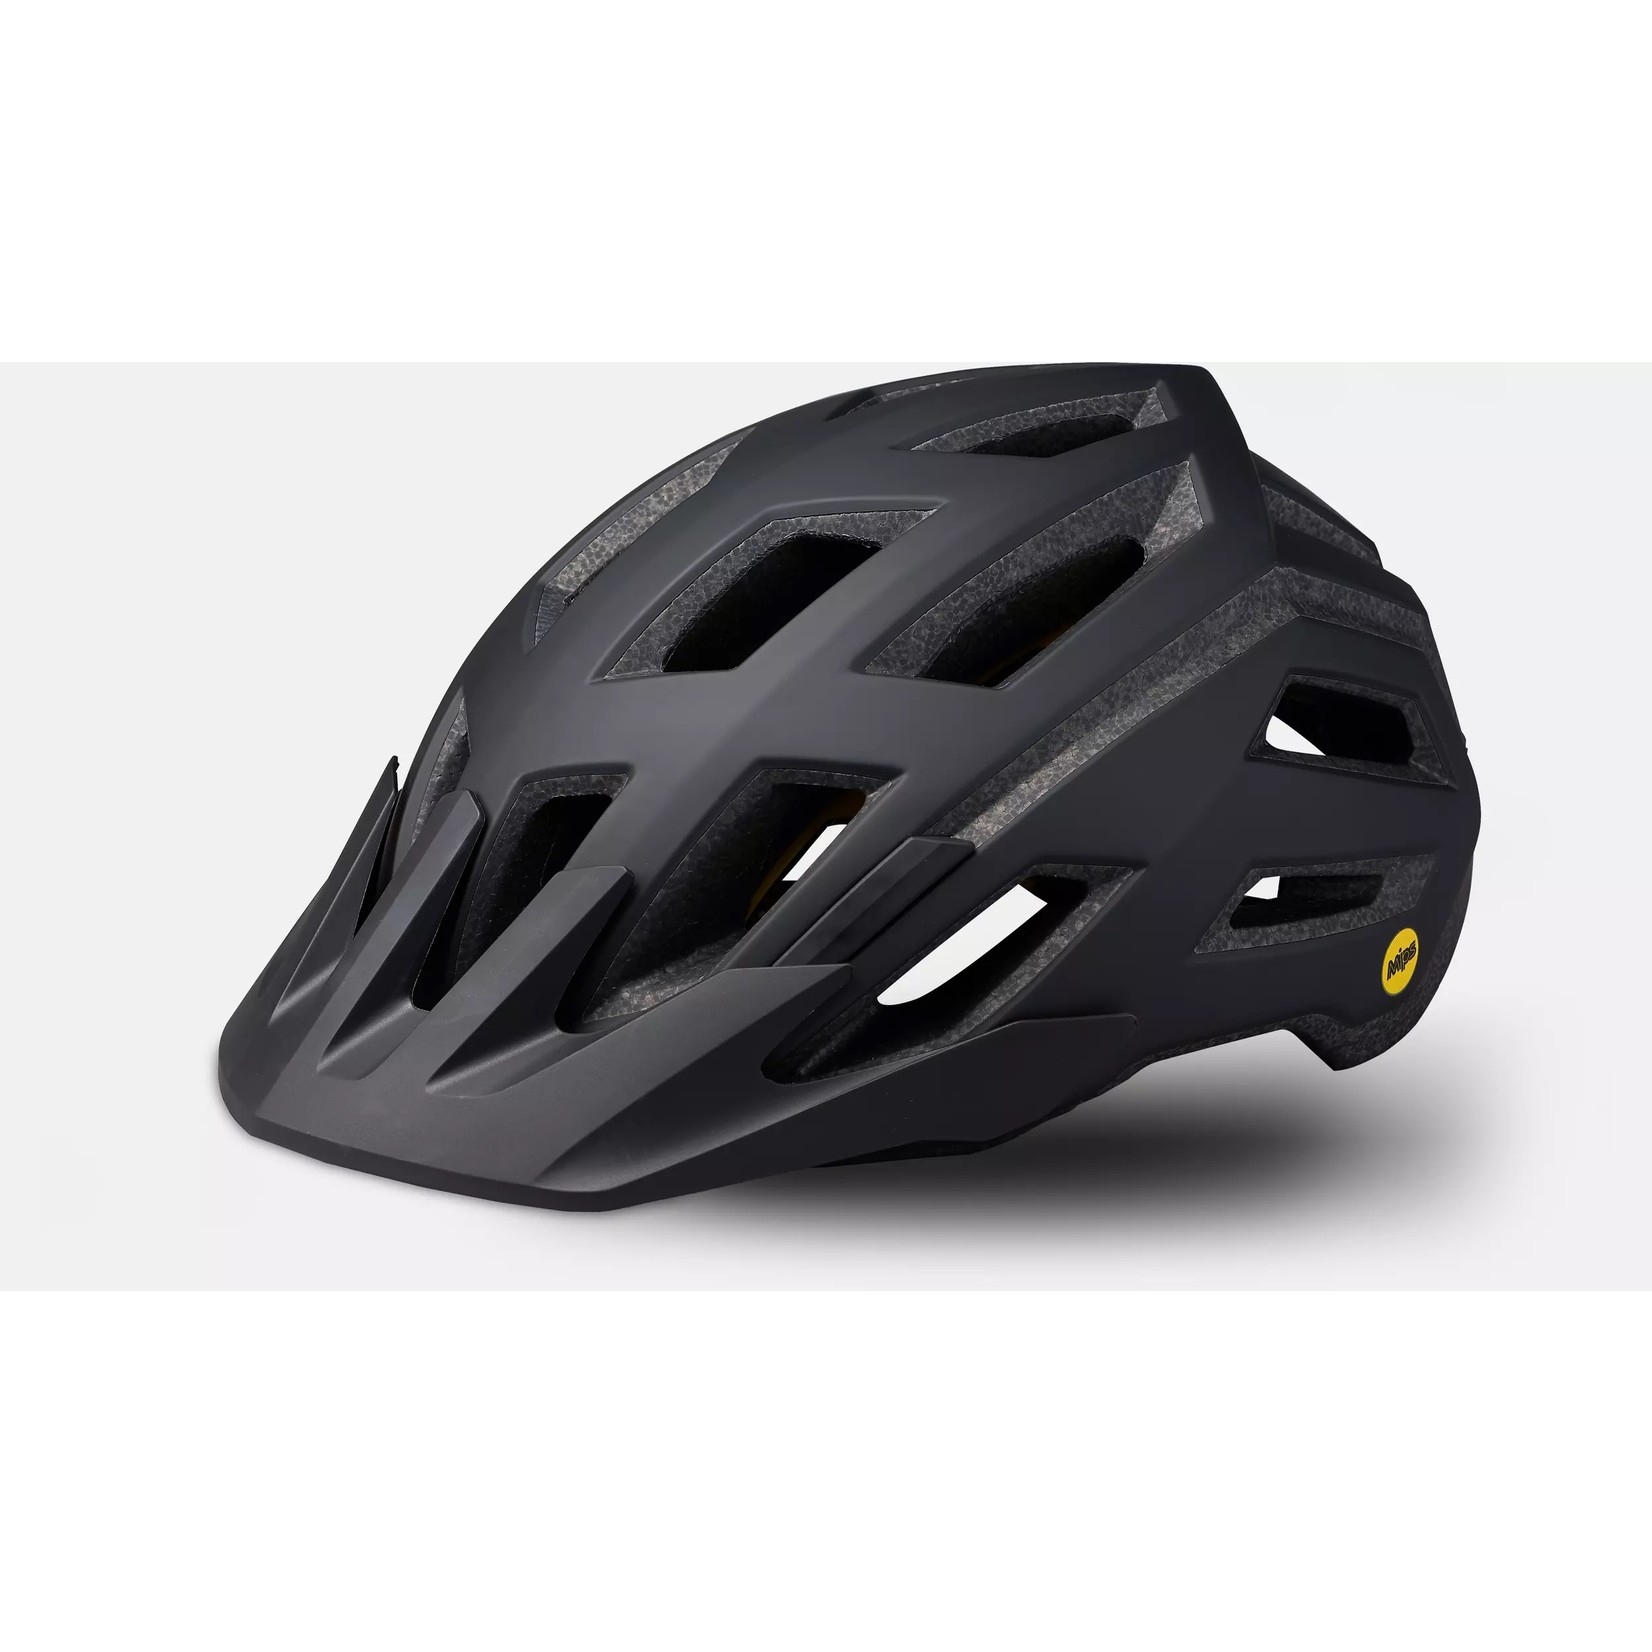 Specialized Specialized Tactic 3 Helmet